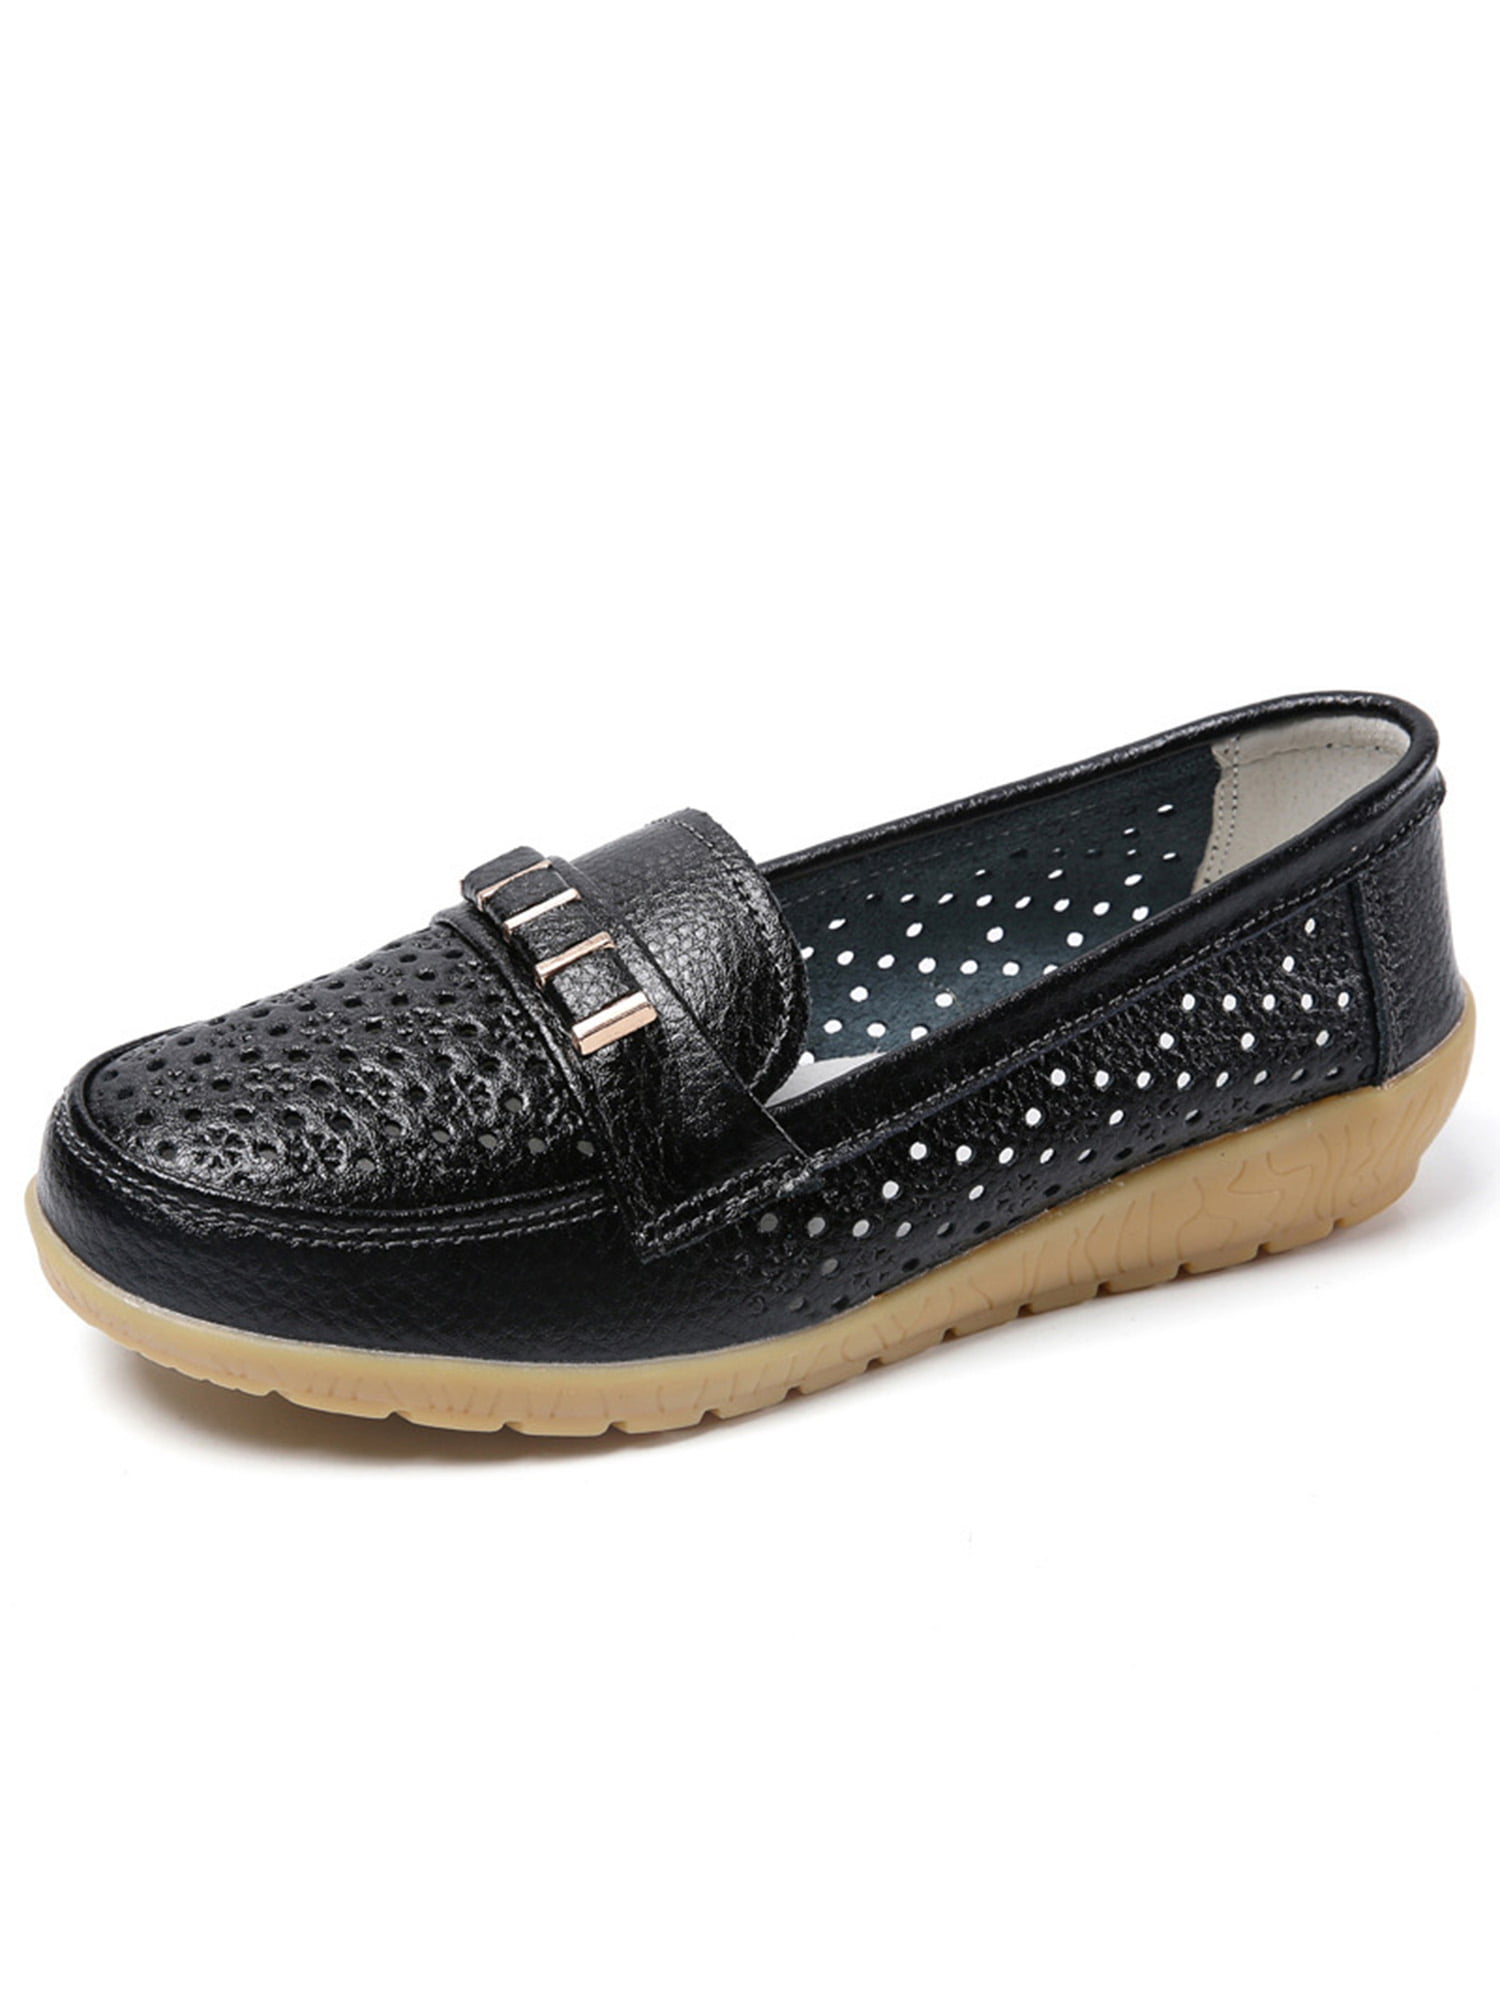 Women Hollow Out Loafers Flat Boat Shoes Breathable leather Casual Pumps Slip-on 